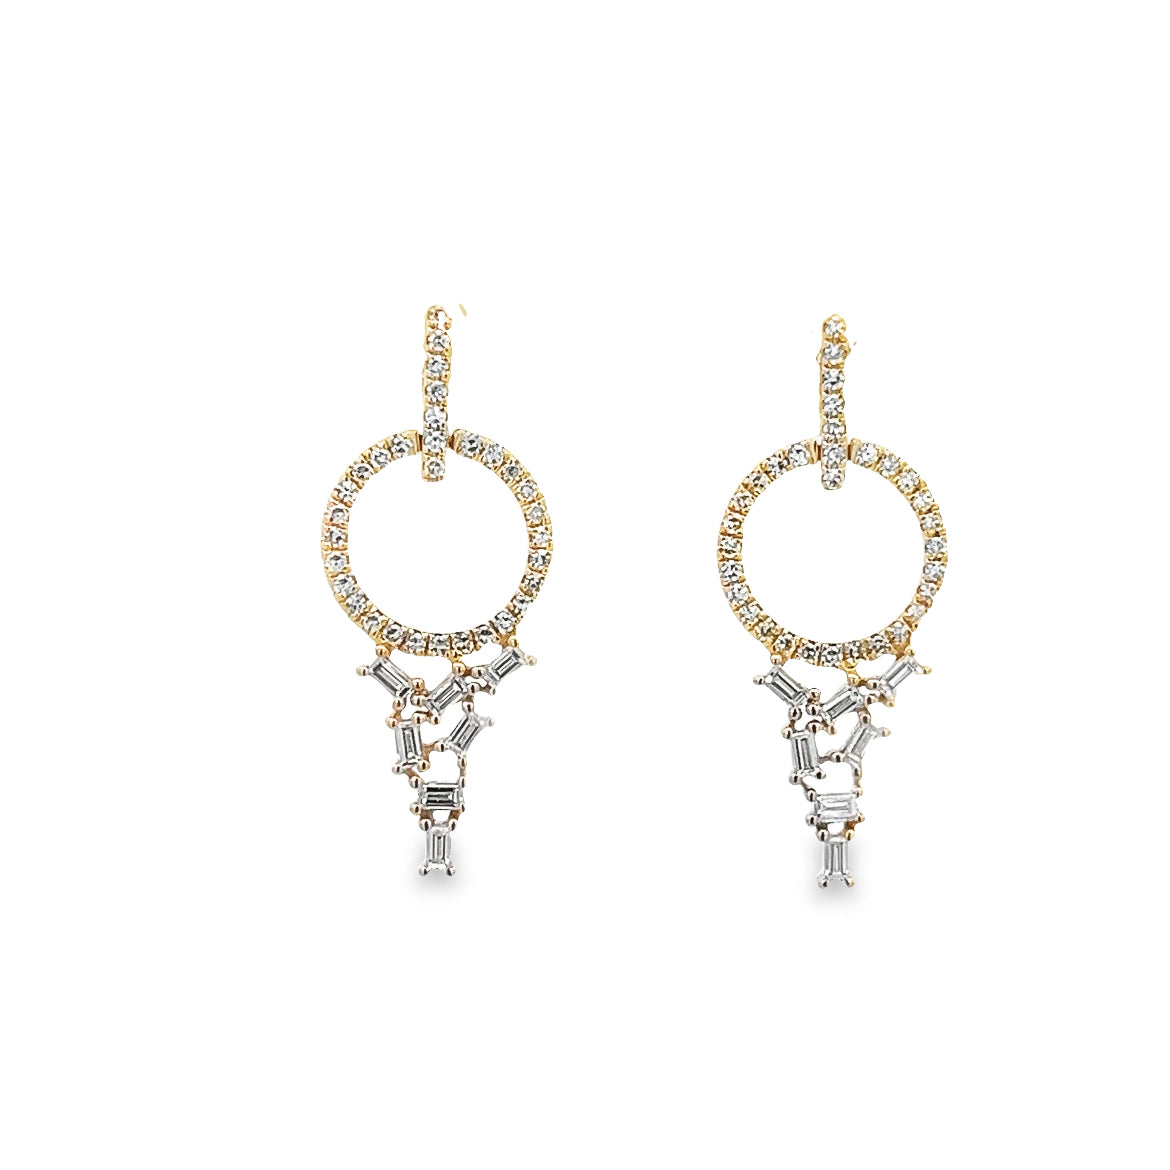 14K GOLD CIRCLES LARIAT EARRINGS WITH BAGUETTE DIAMOND